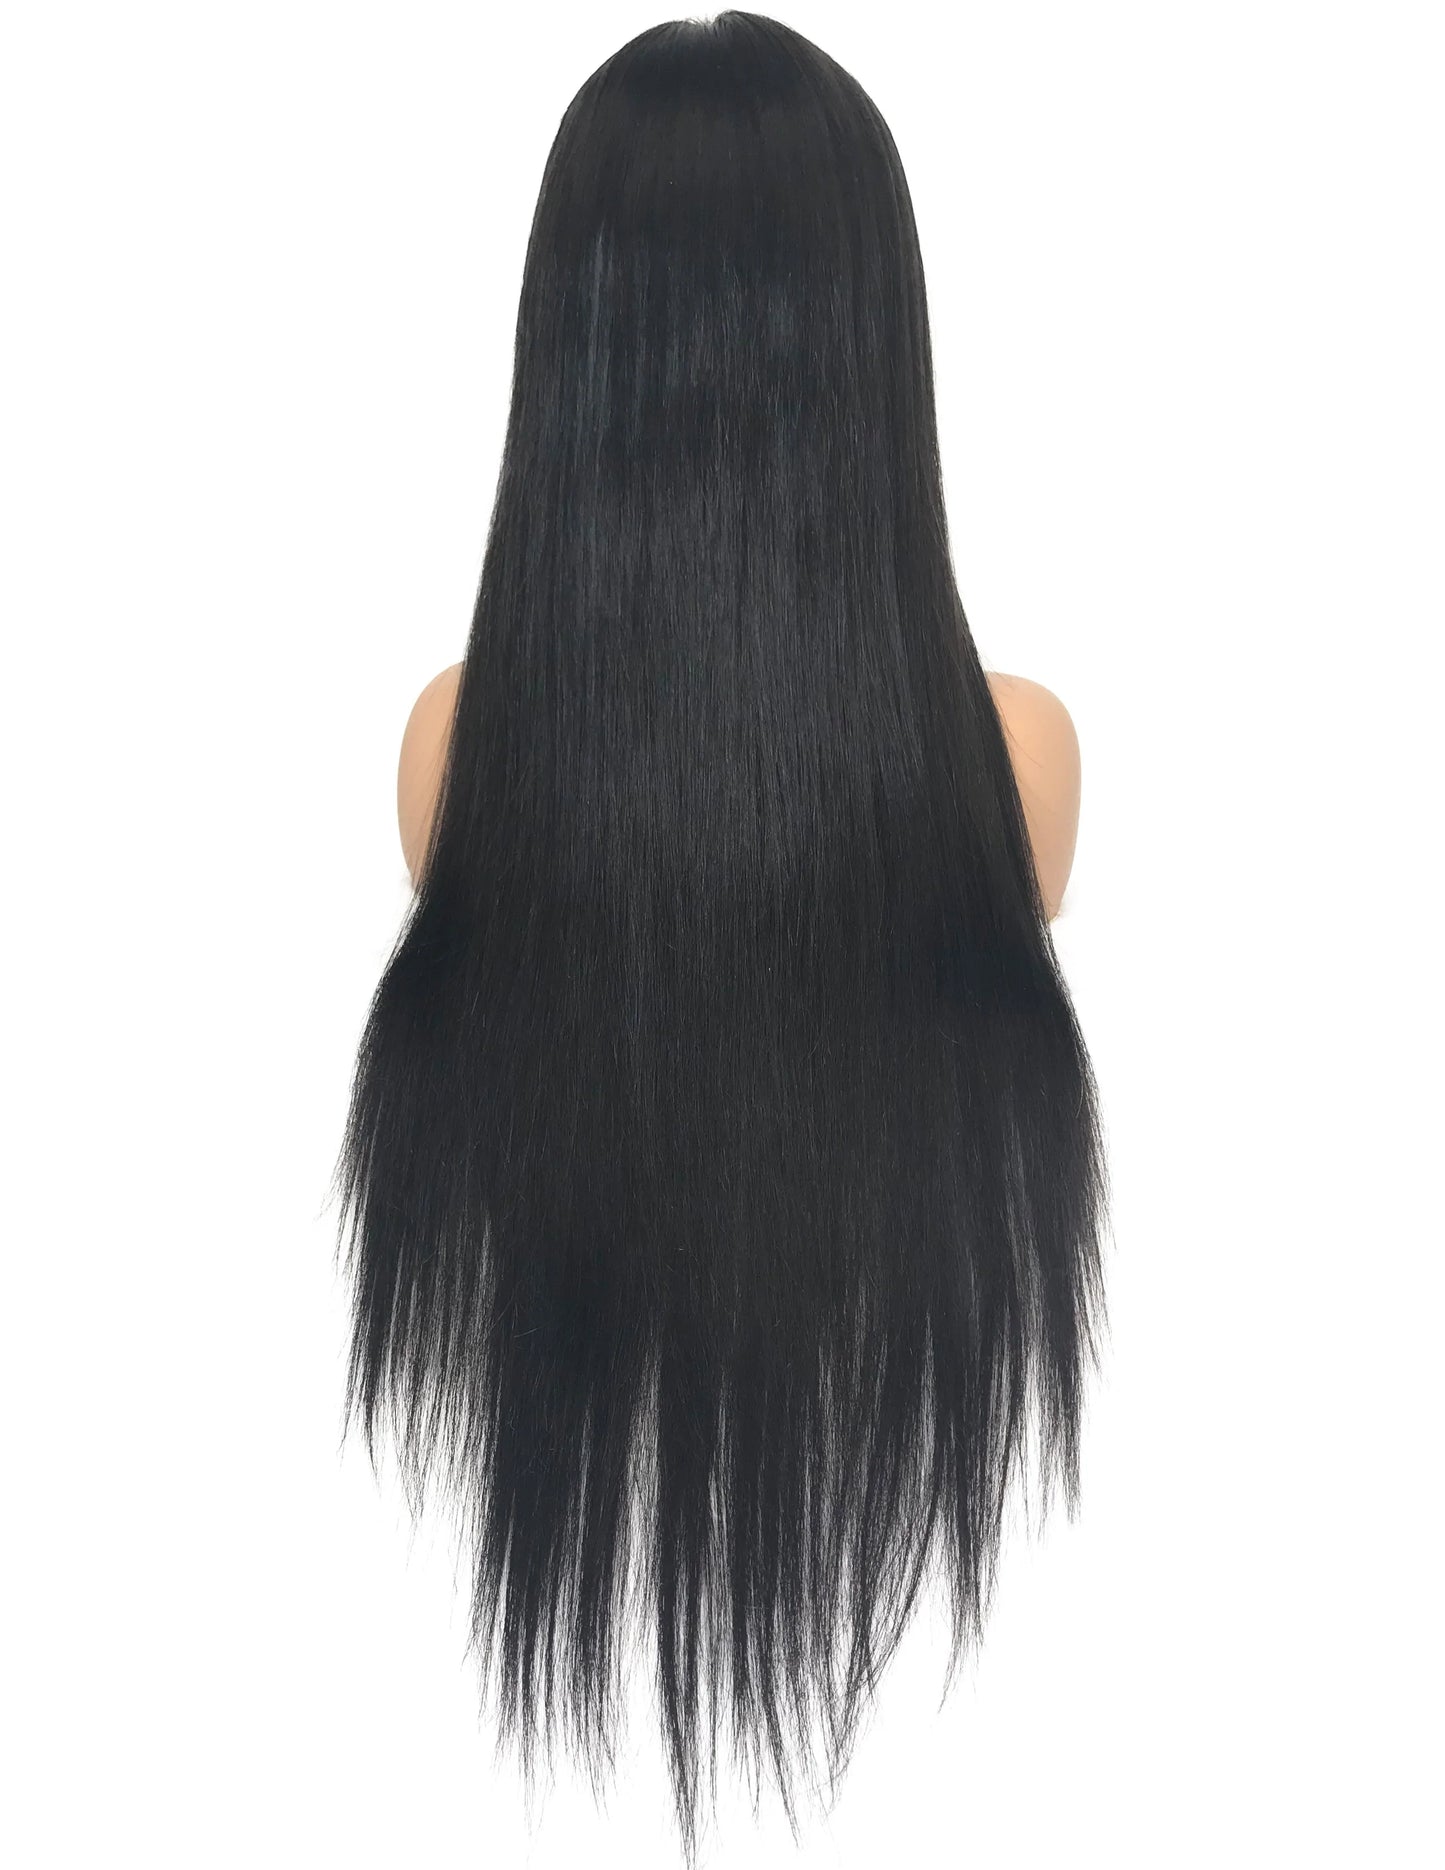 Malaysian Straight Full Lace Human Hair Wig - eHair Outlet